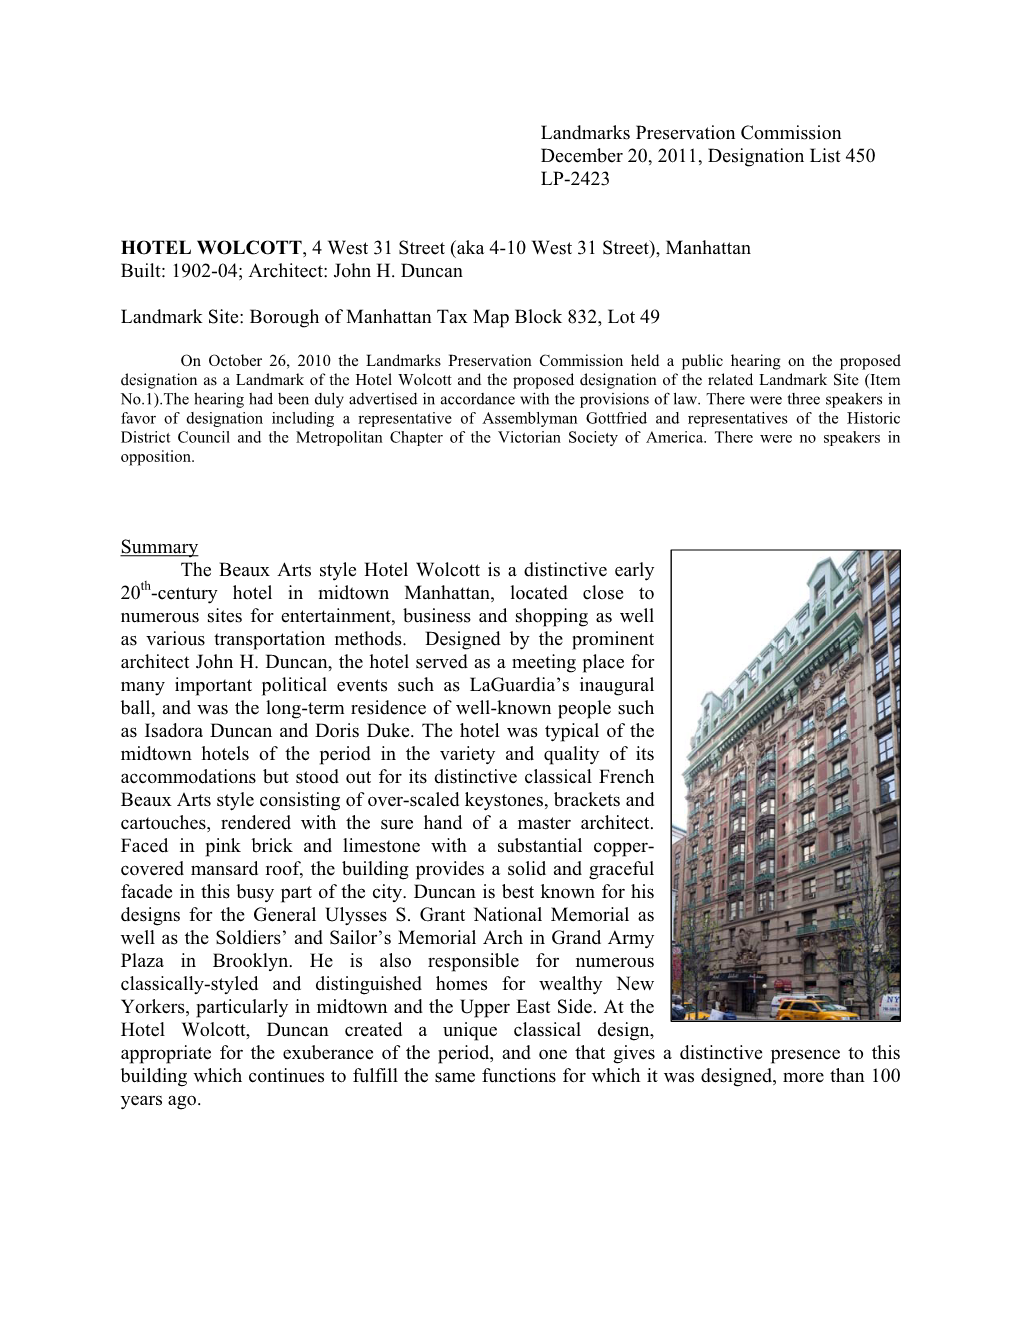 The Hotel Wolcott and the Proposed Designation of the Related Landmark Site (Item No.1).The Hearing Had Been Duly Advertised in Accordance with the Provisions of Law